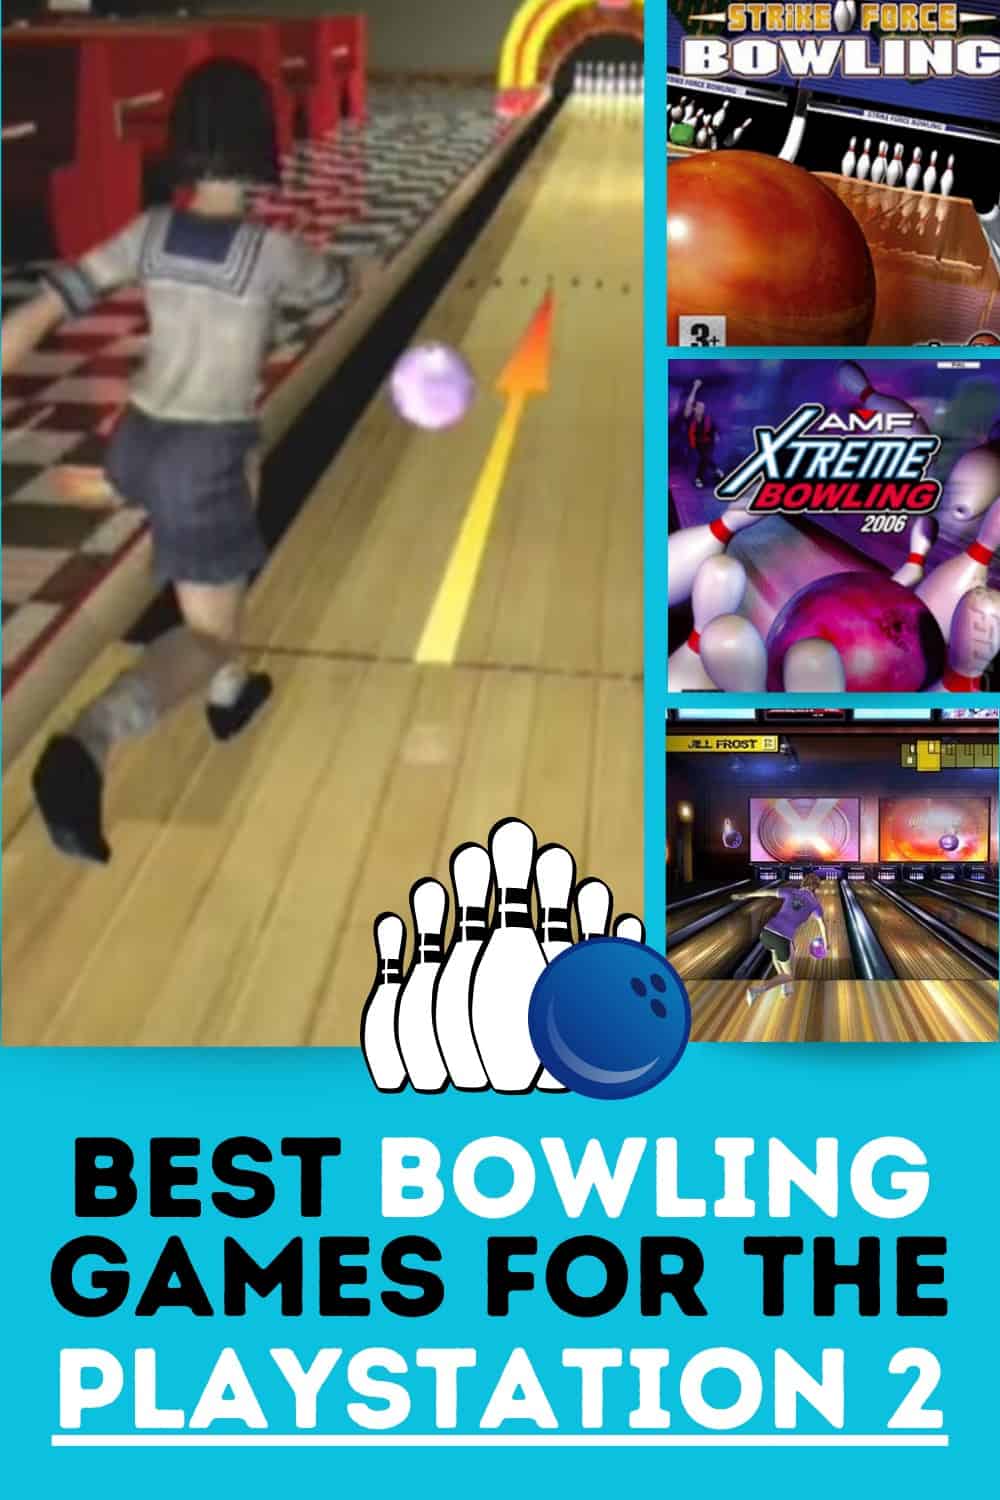 What is the best bowling game for the PS2?